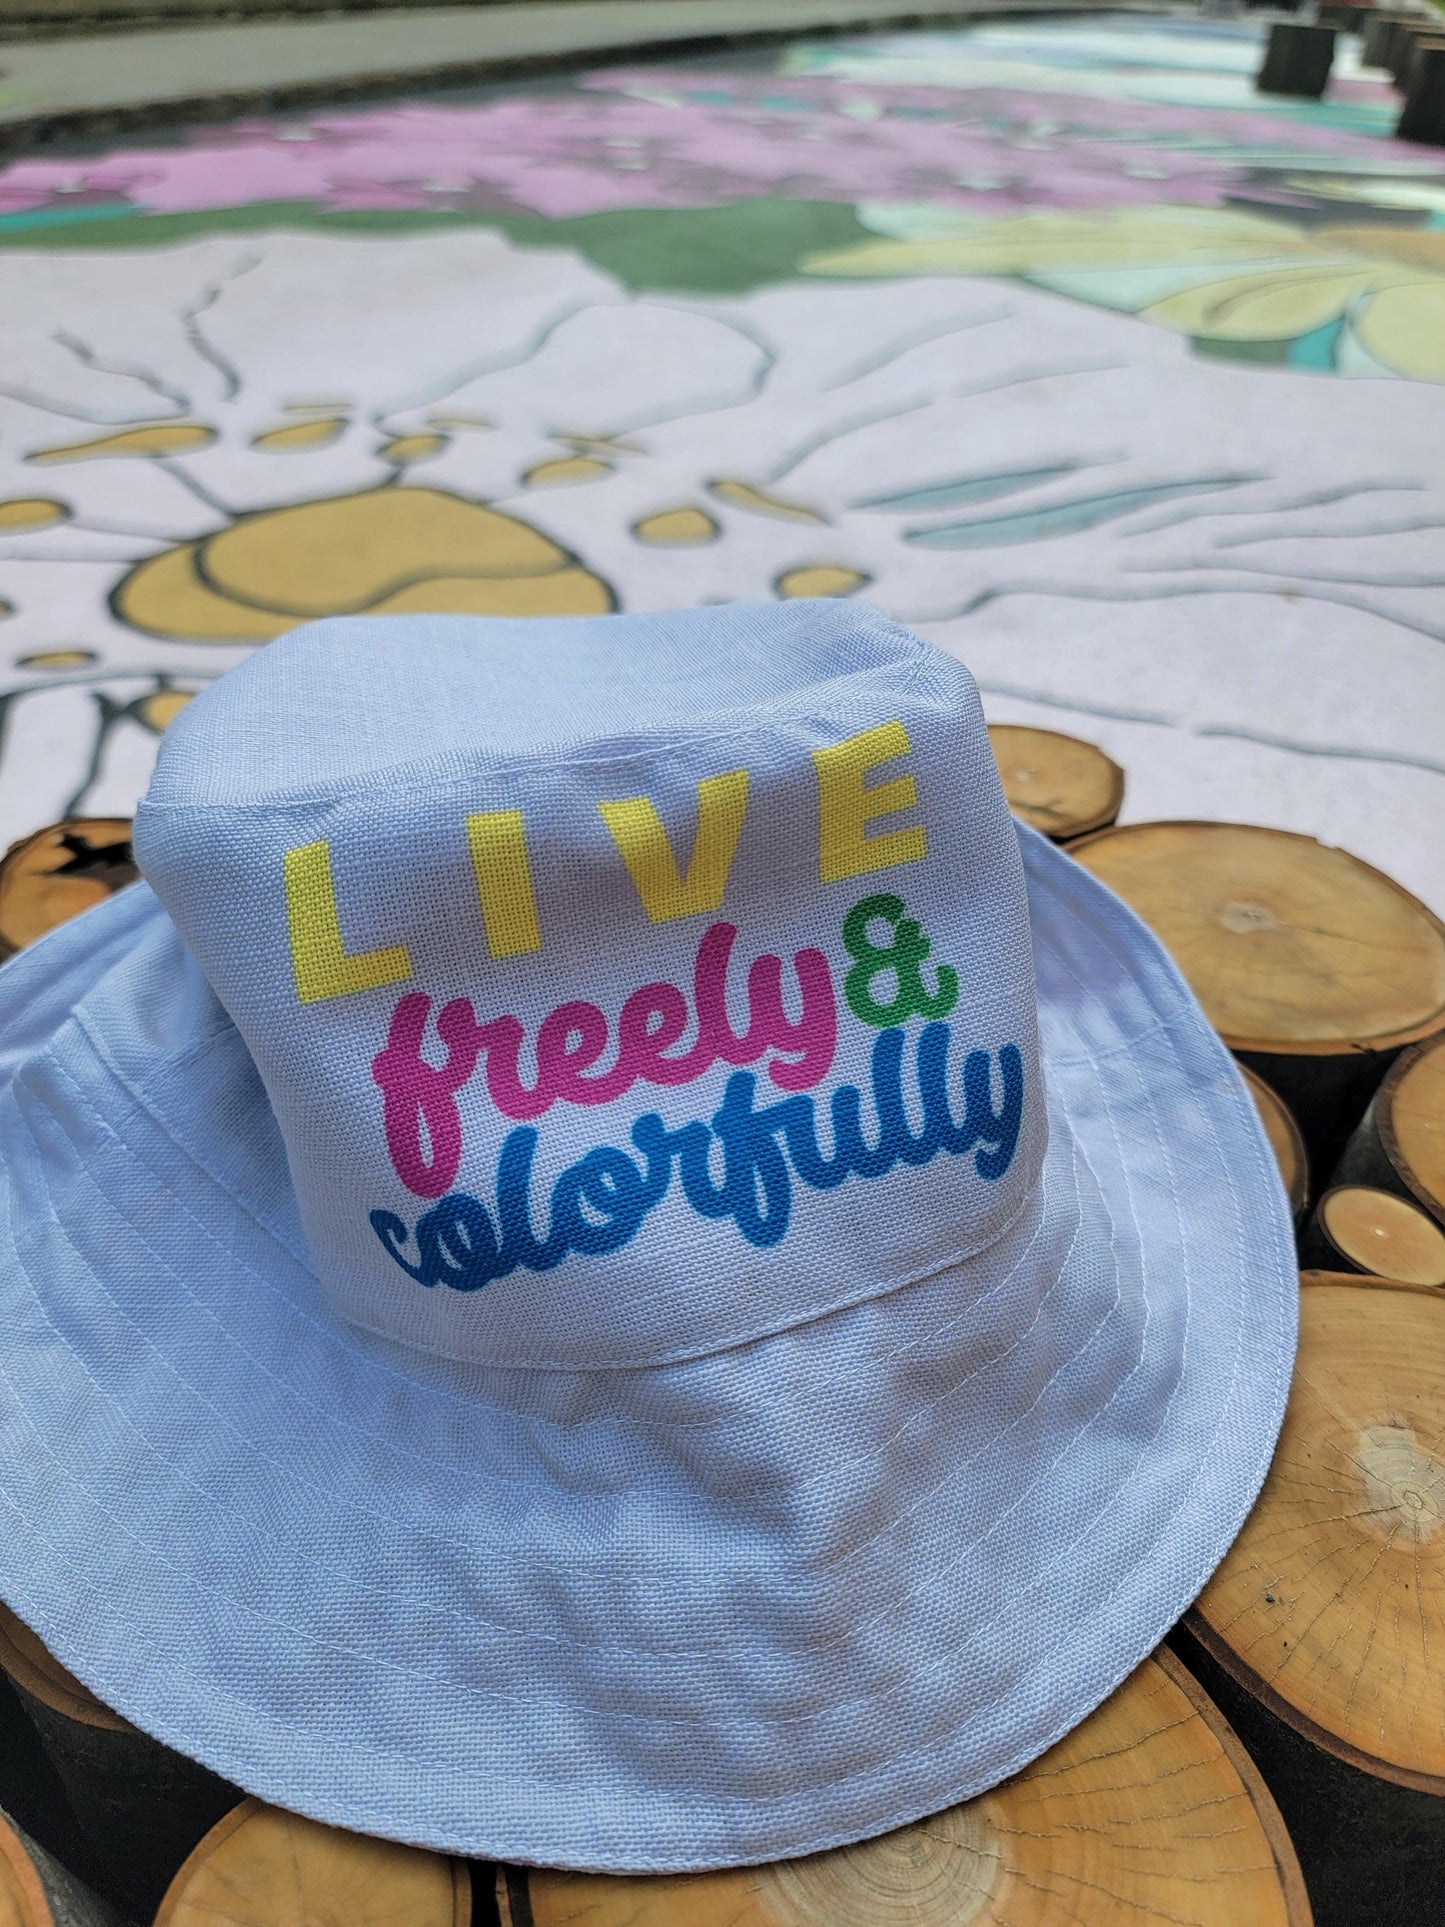 Manifest the Goodness/Live Colorfully Reversible Bucket Hat